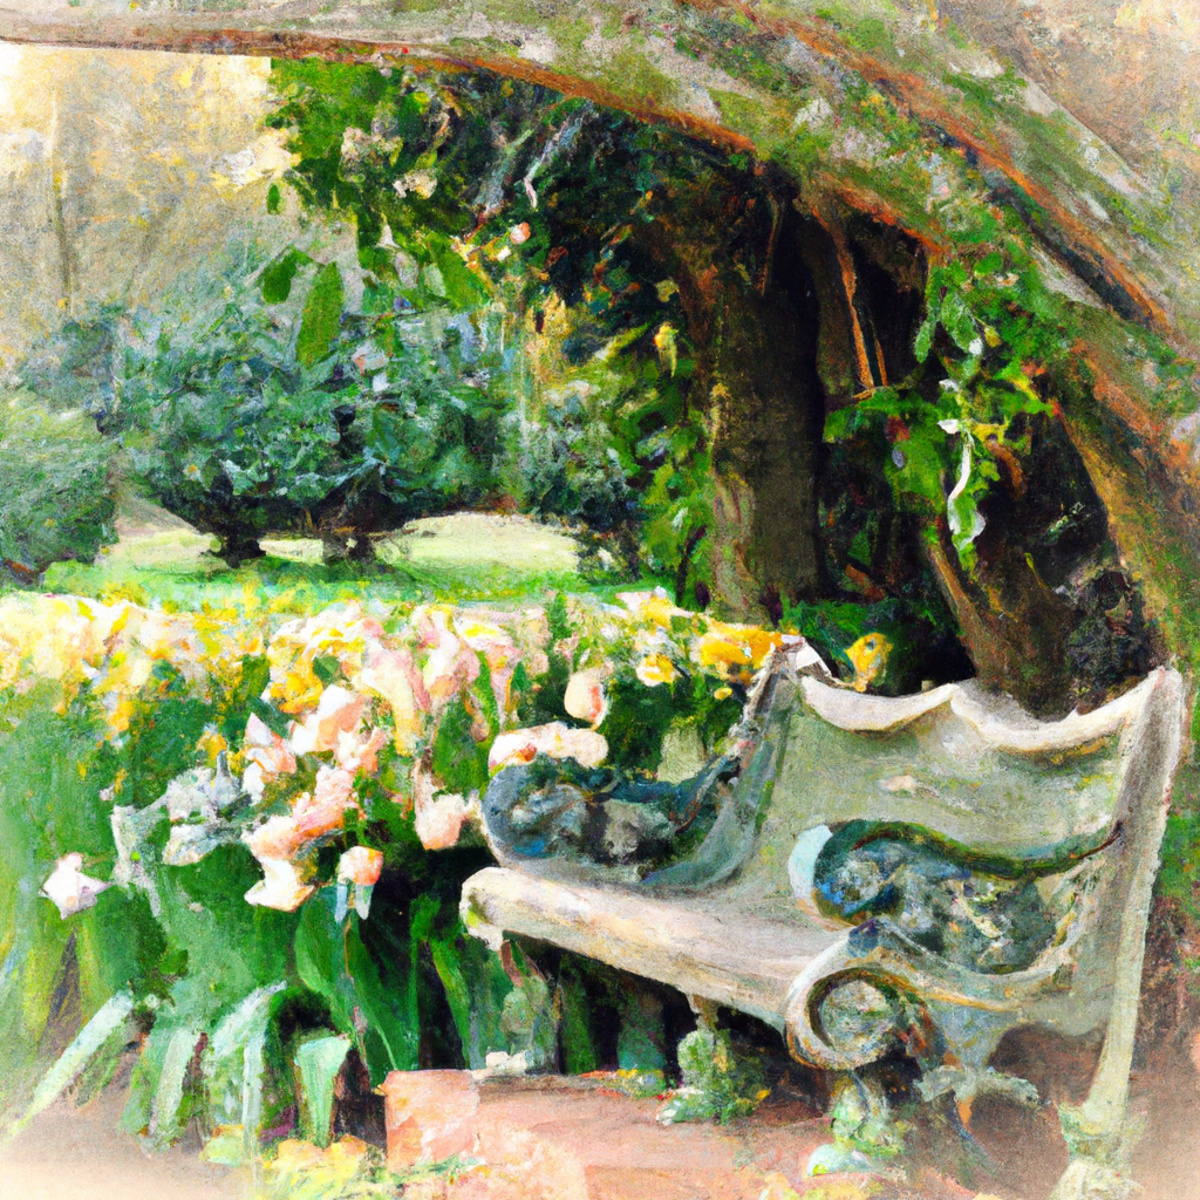 Serene garden with vibrant flowers and a weathered stone bench, symbolizing solace and contemplation for those with cystinuria.